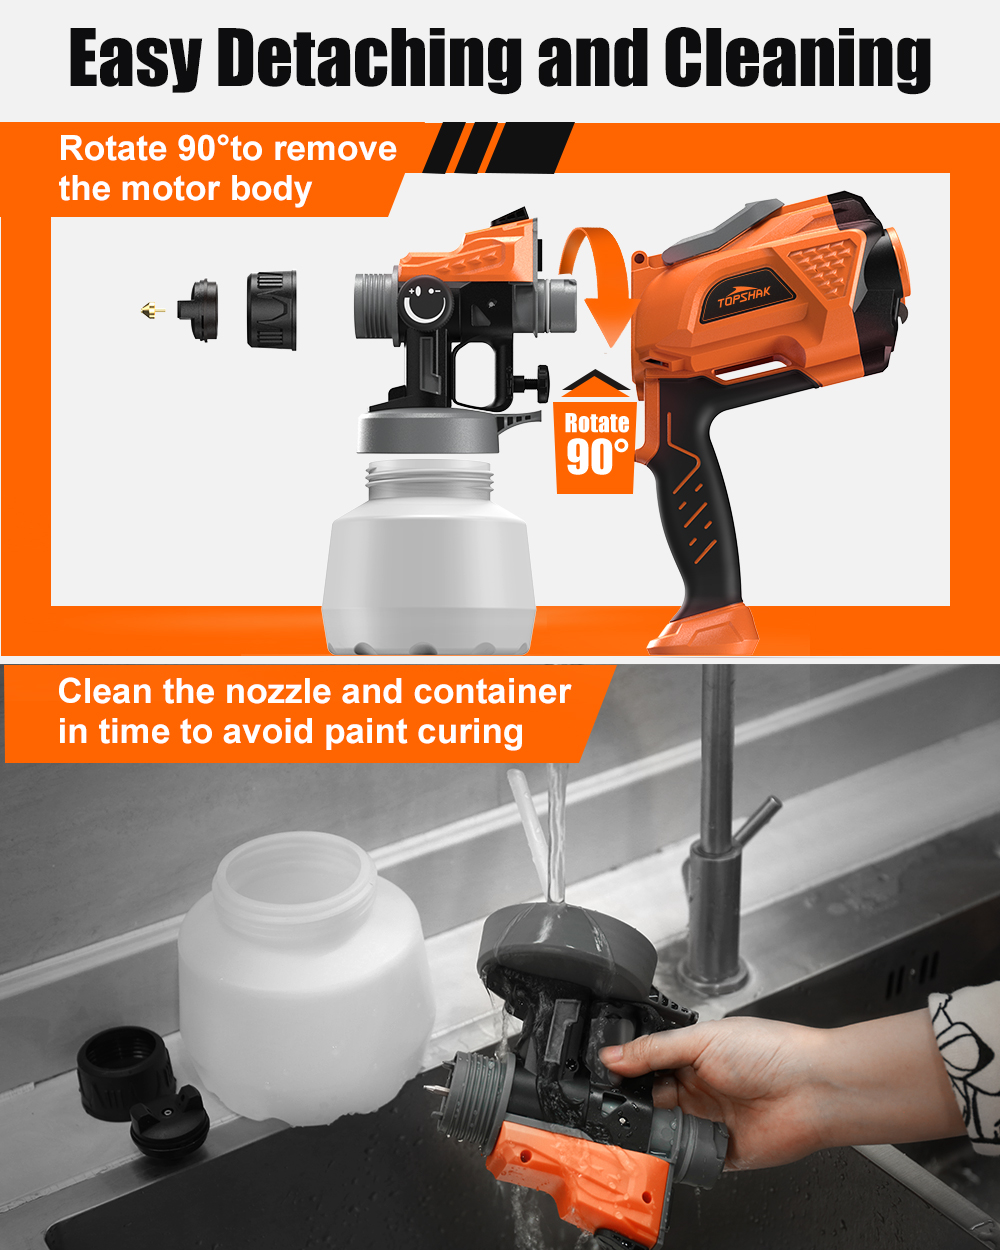 TOPSHAK-TS-SG2-700W-1200ml-Wired-Electric-Paint-Sprayer-Watering-Can-Tool-HVLP-Paint-Spray-Tool-with-1913835-5